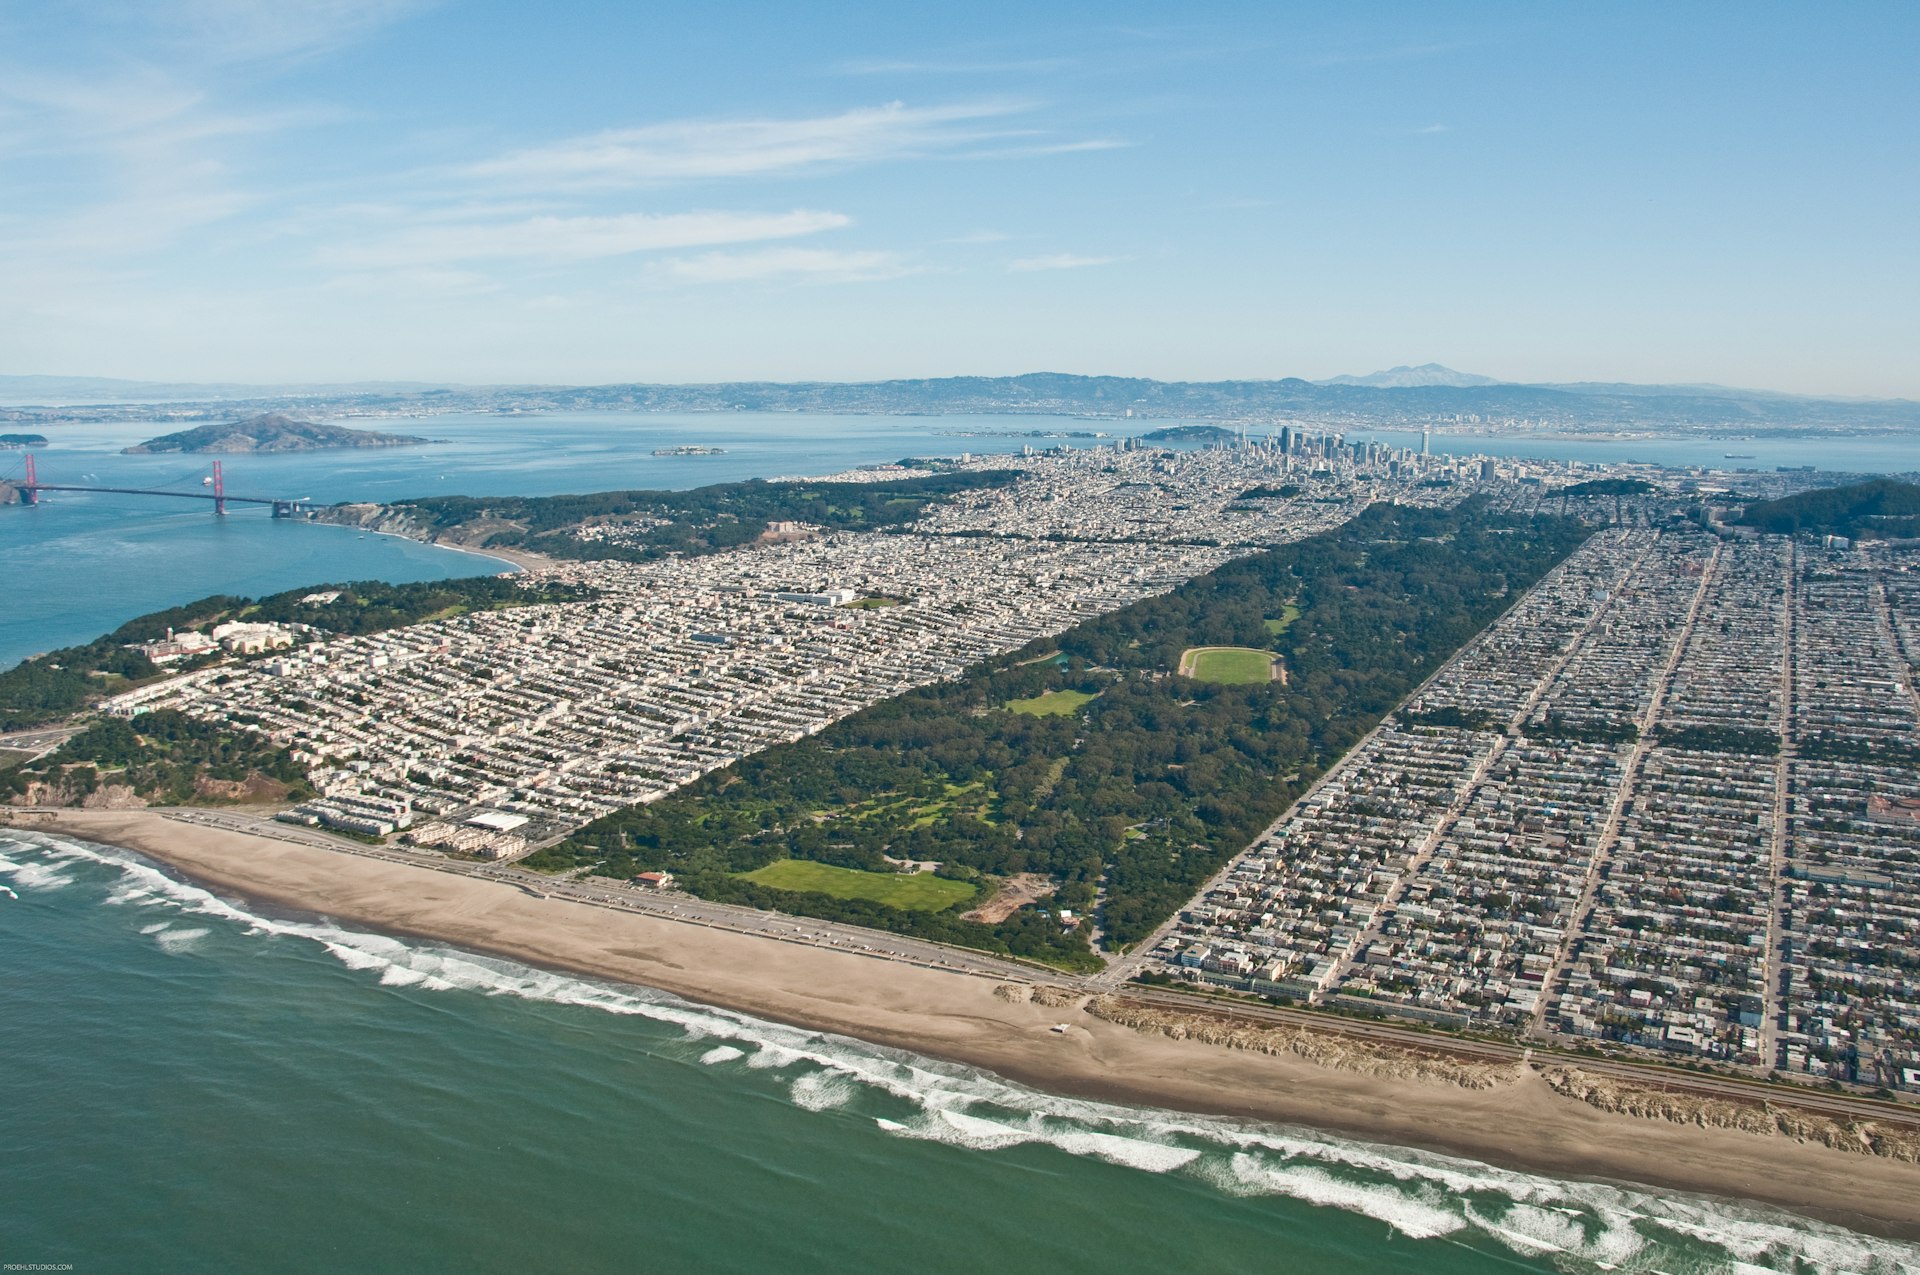 An aerial view of Golden Gate Park from the Pacific Ocean with the Golden Gate Bridge in the background.